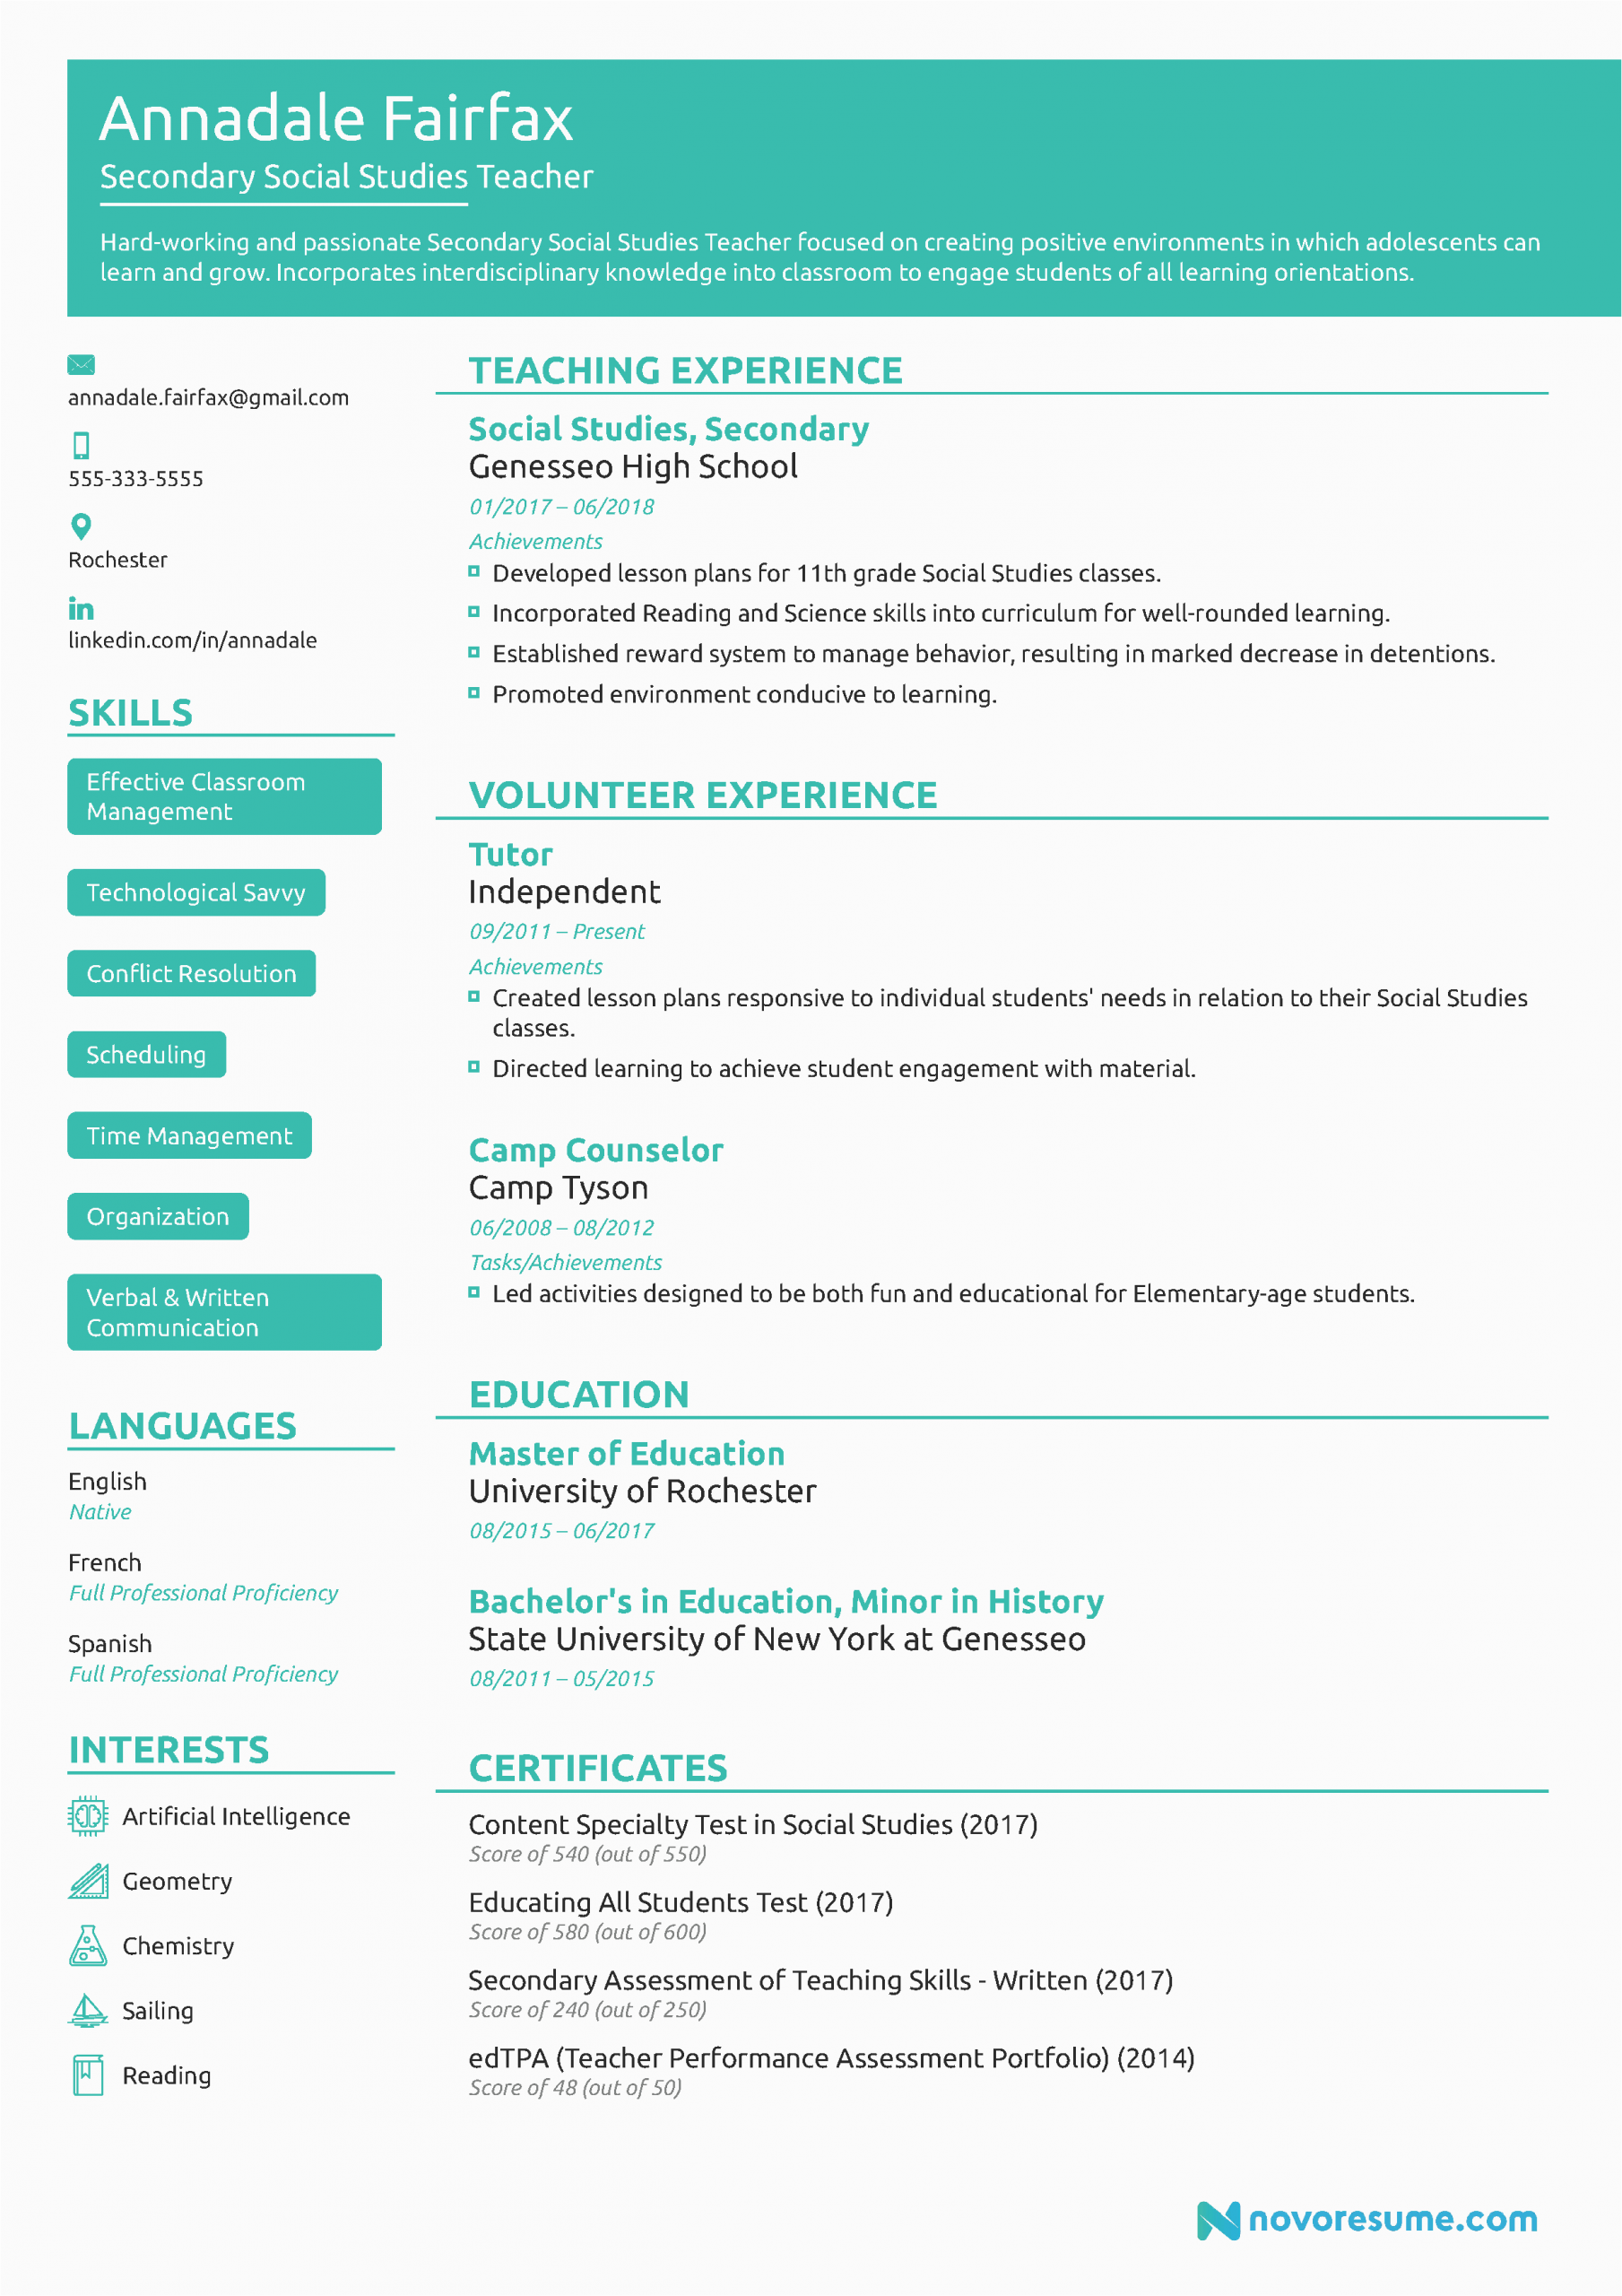 Free Resume Templates for Teaching Positions Teacher Resume Example [w Free Template]